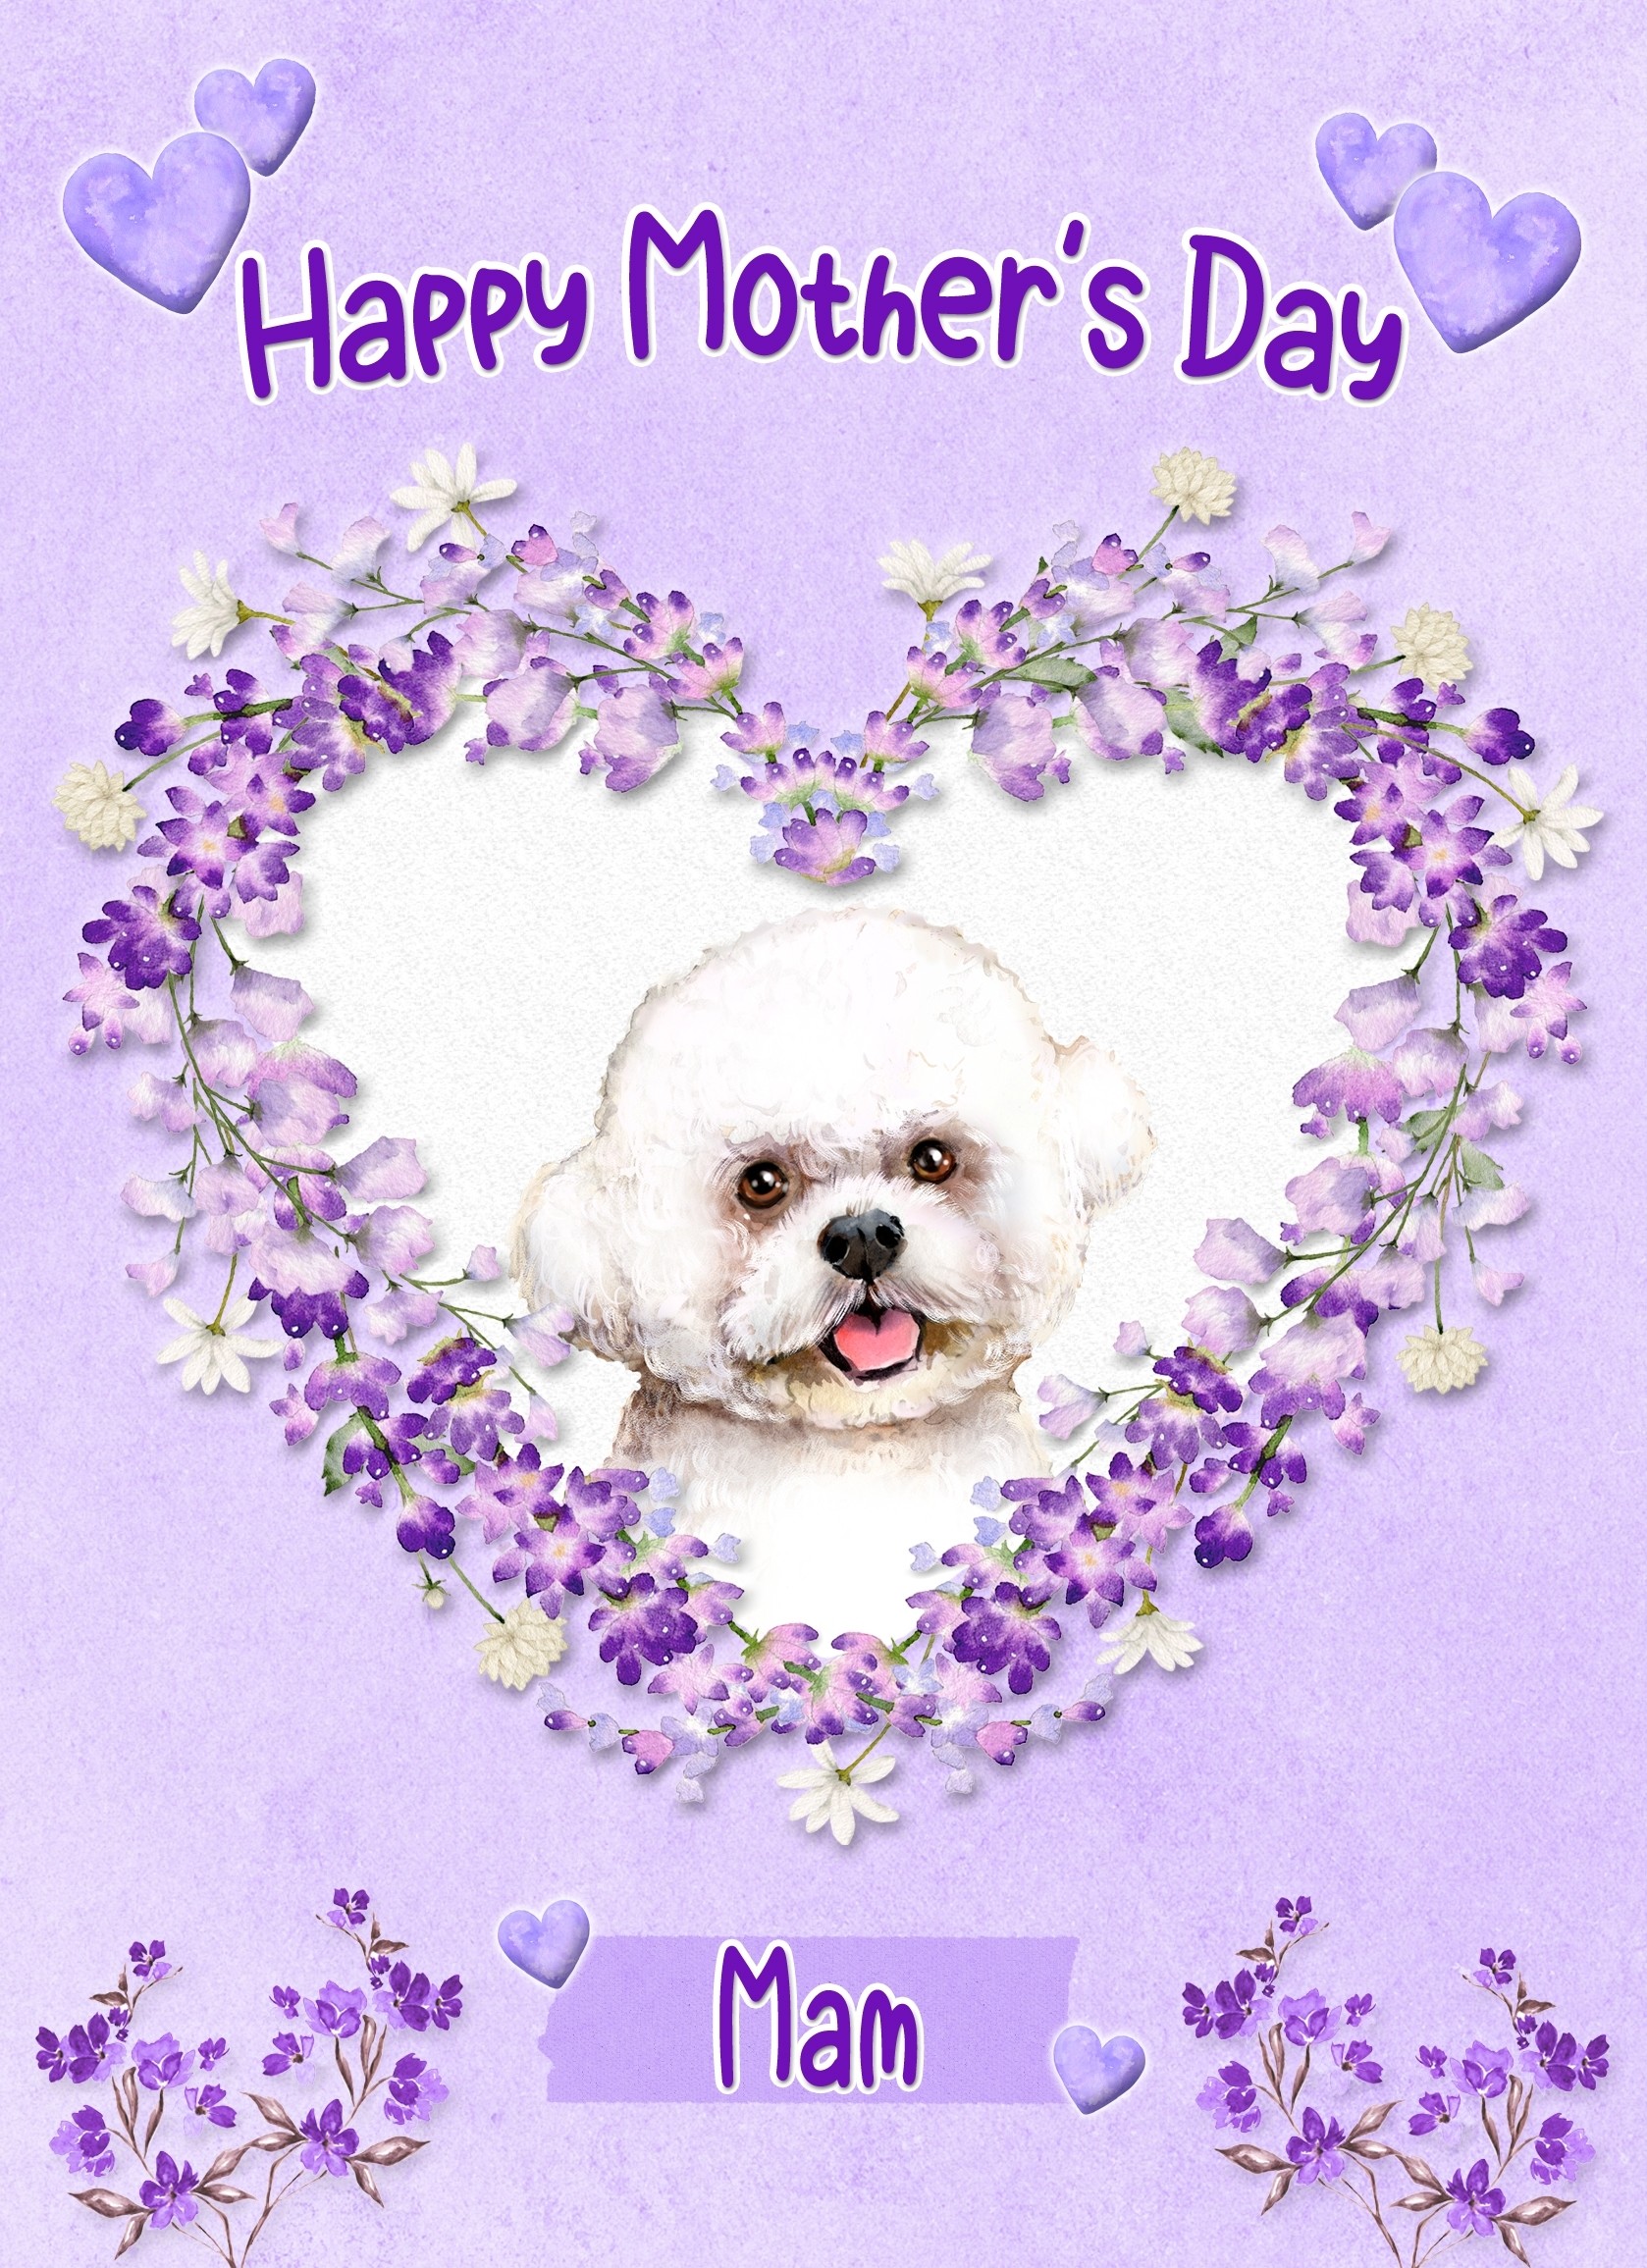 Bichon Frise Dog Mothers Day Card (Happy Mothers, Mam)